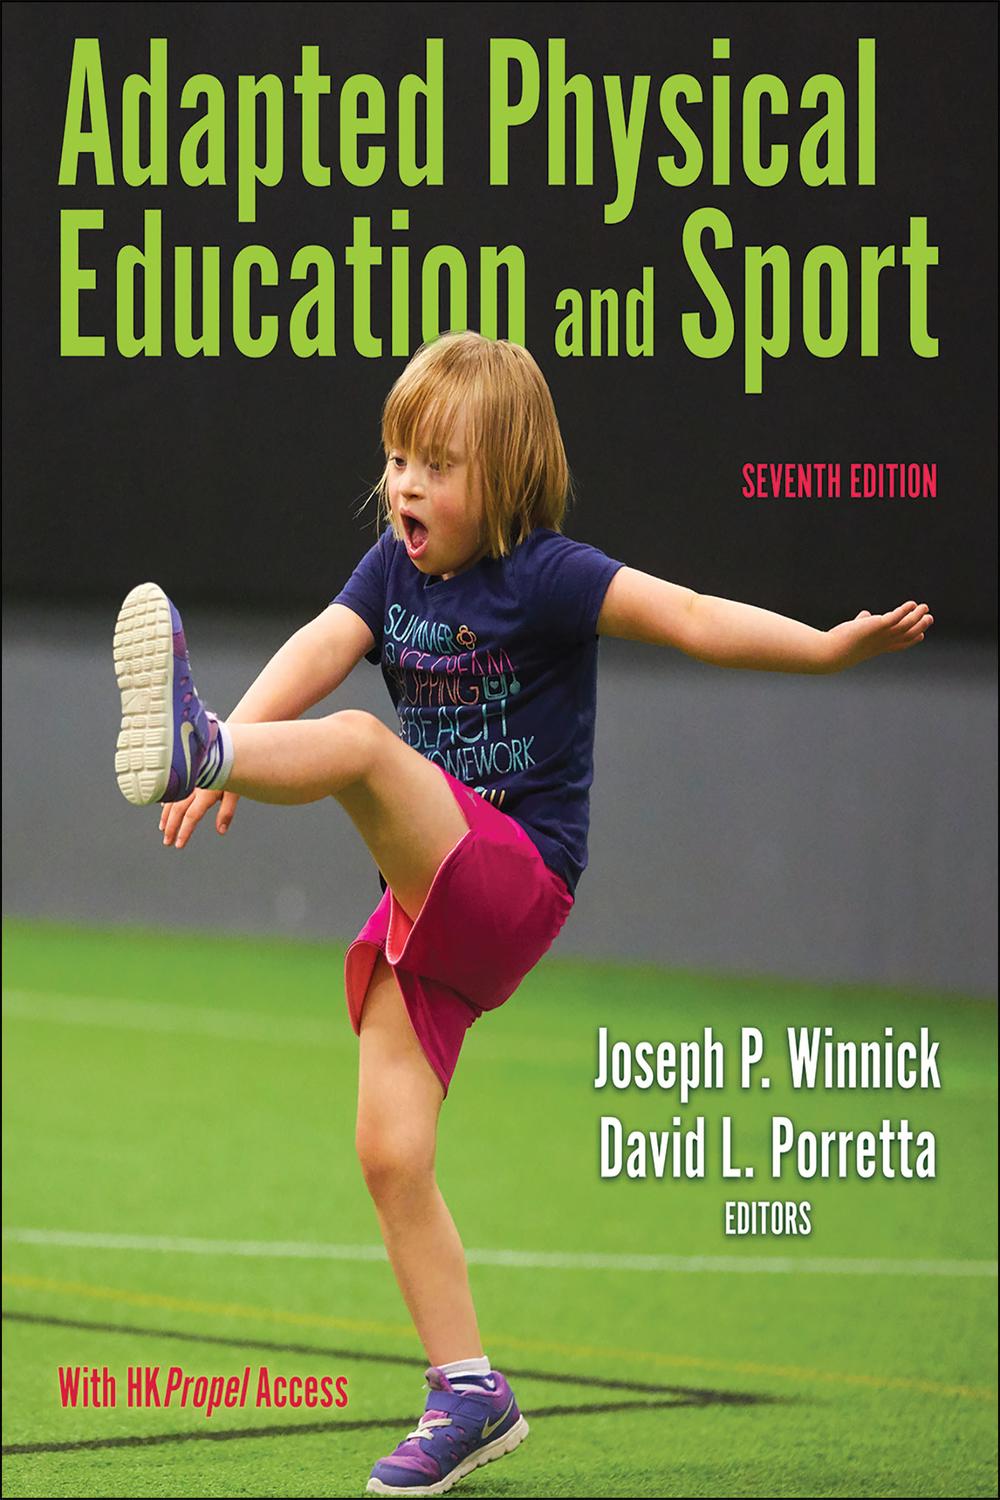 Adapted physical education and sport 6th edition pdf download free teairra mari deserve mp3 download